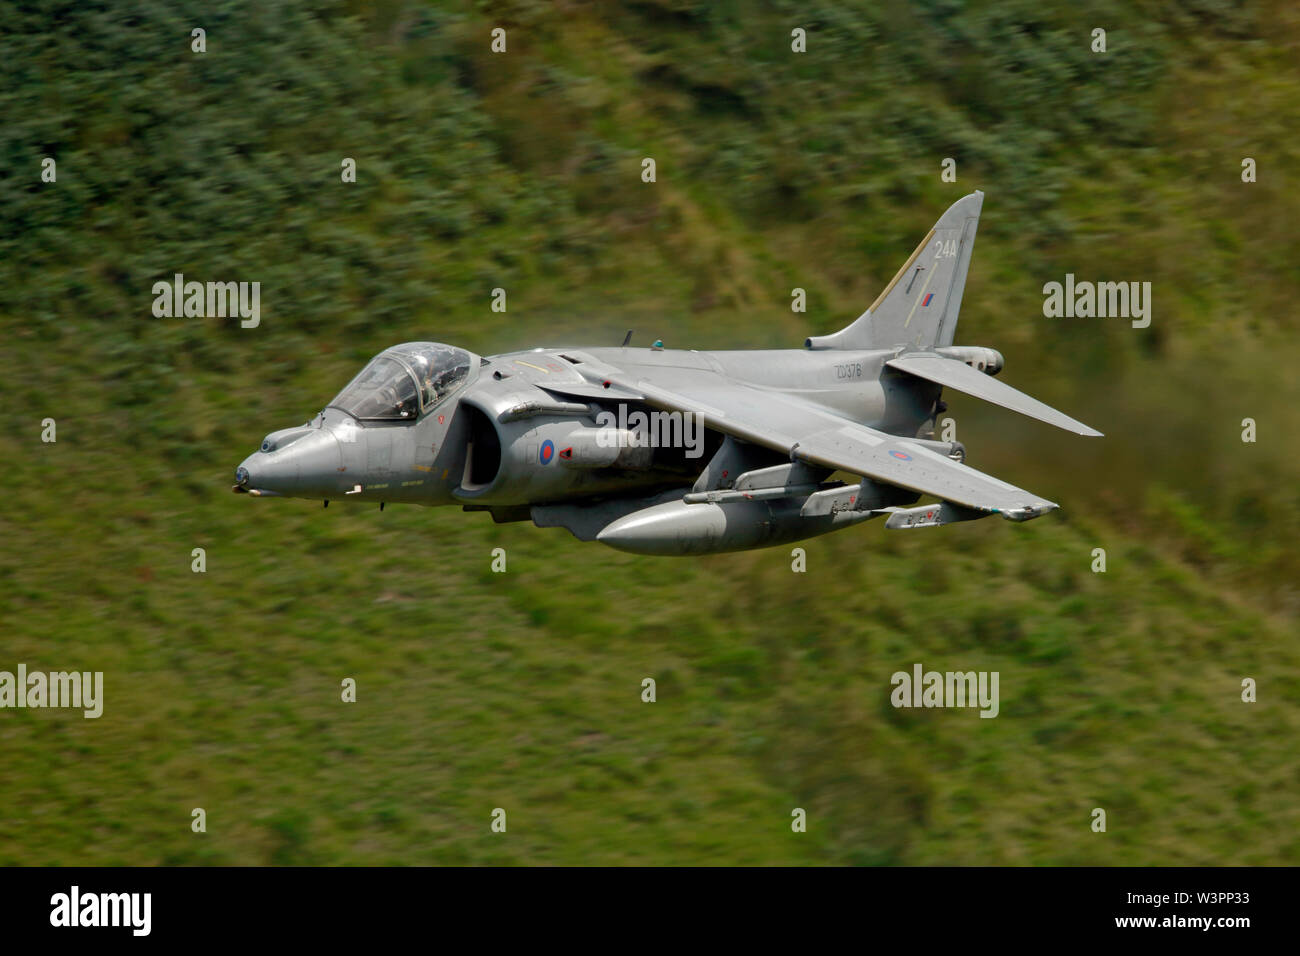 BAE Systems Harrier GR7A ZD376 24A  low-level in the Welsh military training area LFA7 known as the Mach Loop, Dolgellau, Wales. Stock Photo